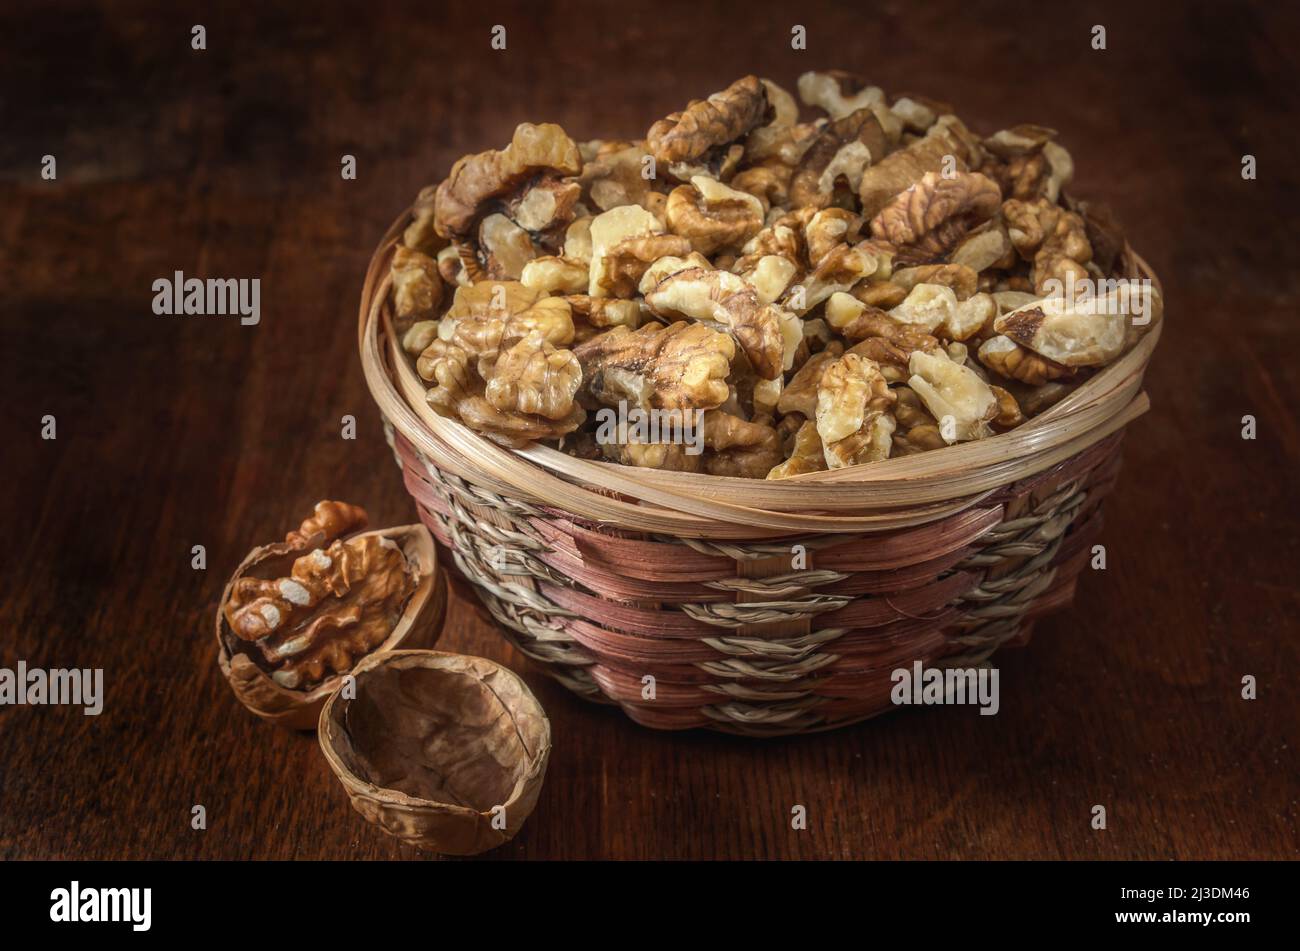 walnuts and kernels in a basket on a dark wooden background Stock Photo